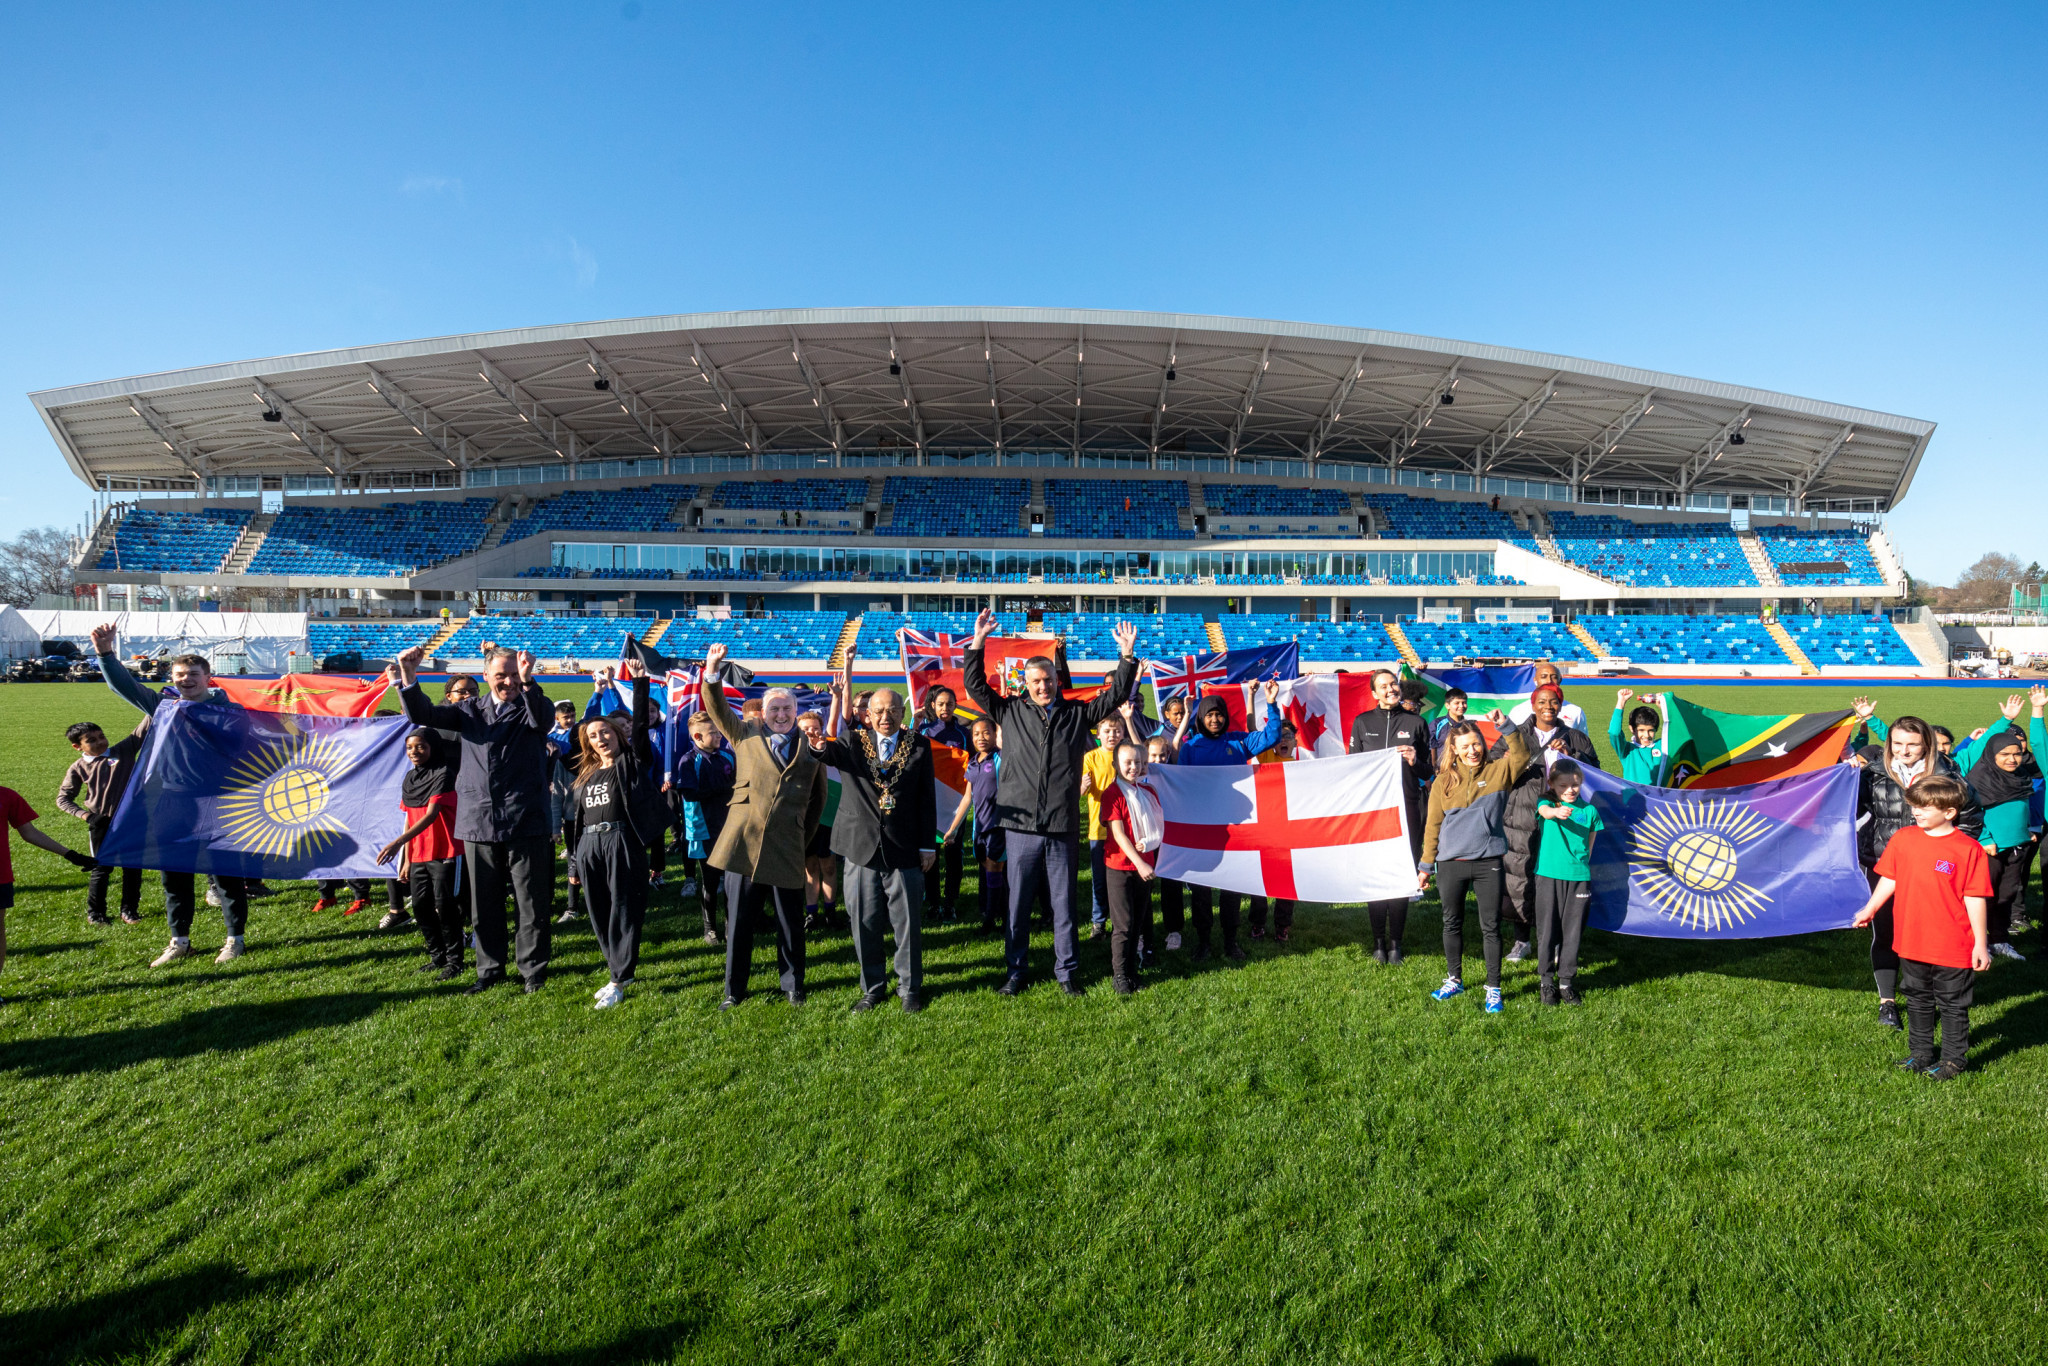 People walked on the Alexander Stadium track for the first time on Commonwealth Day ©Birmingham 2022